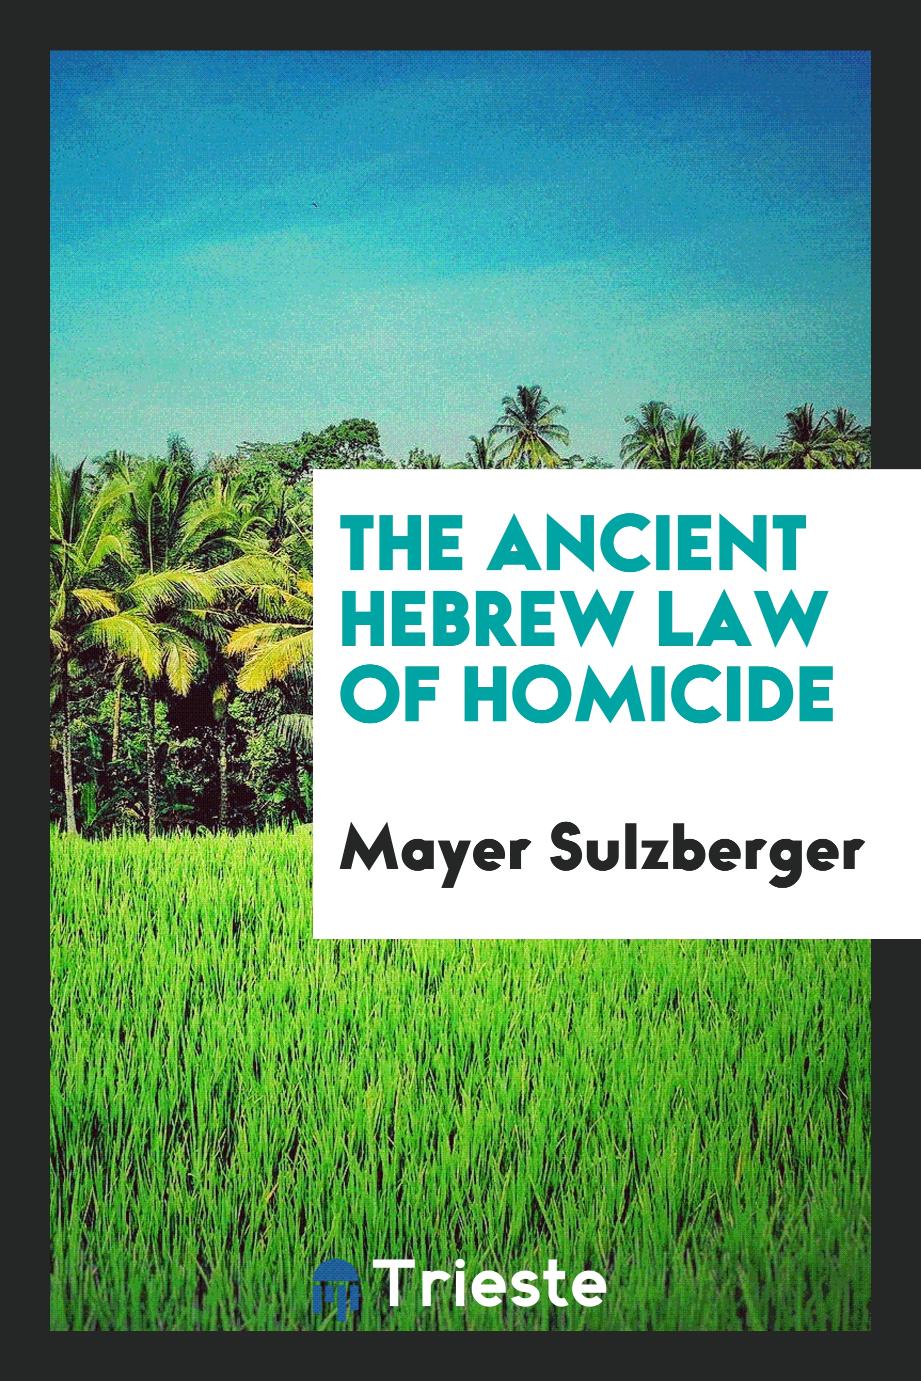 The Ancient Hebrew Law of Homicide